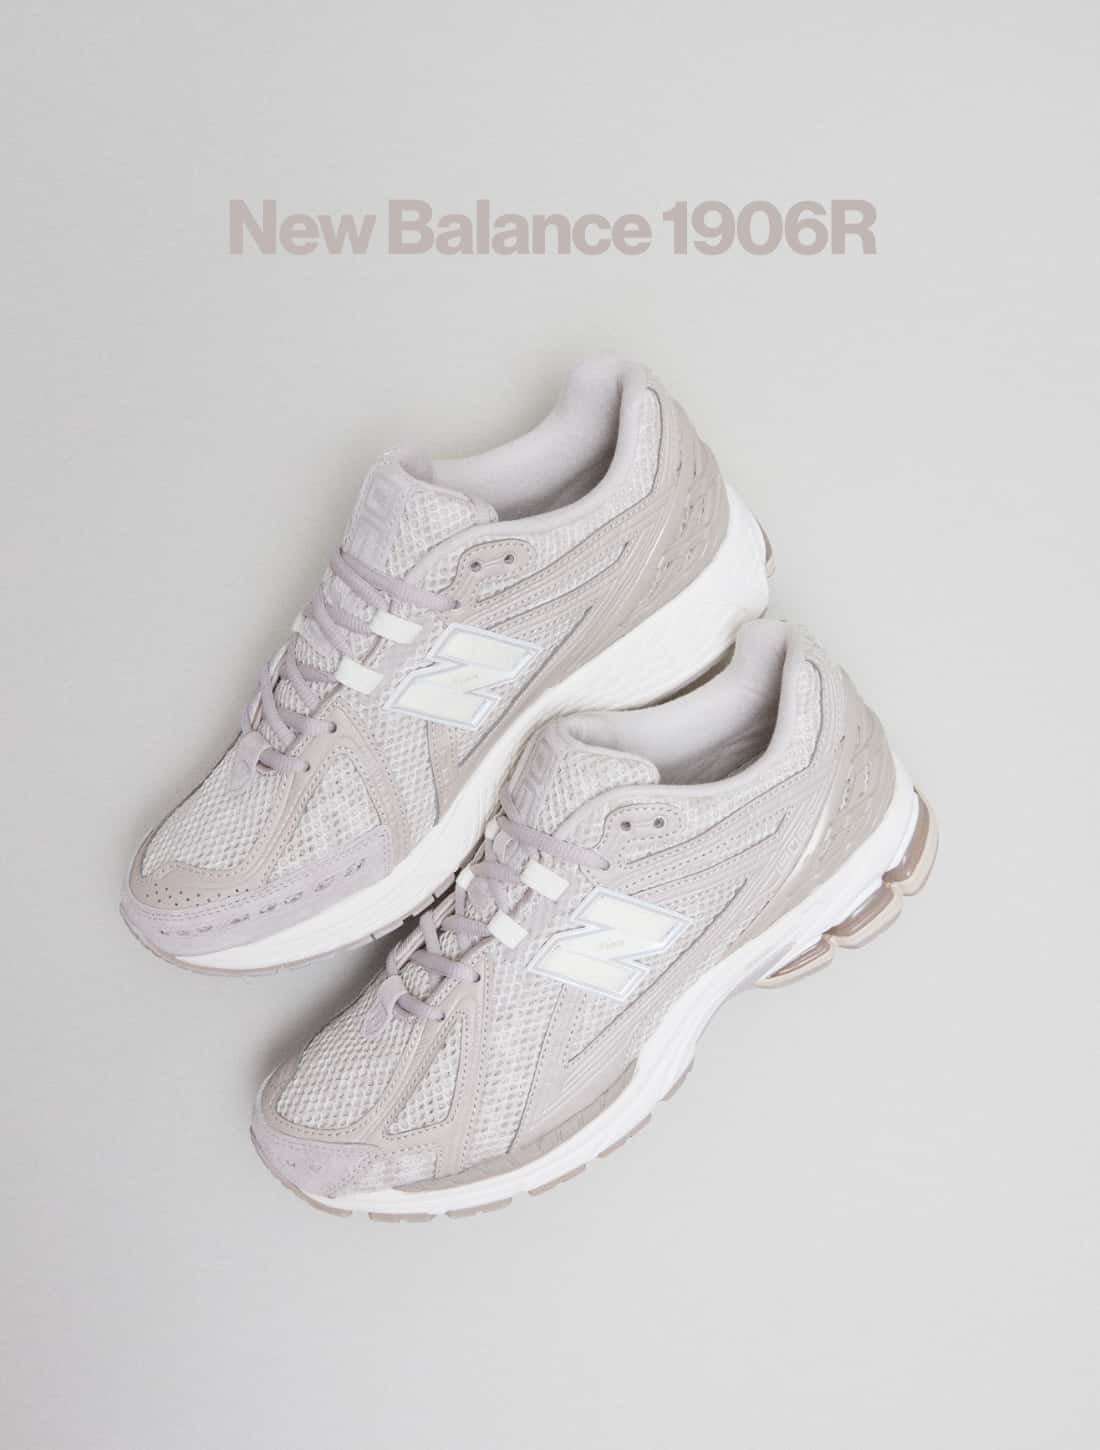 adidas archive website free full form